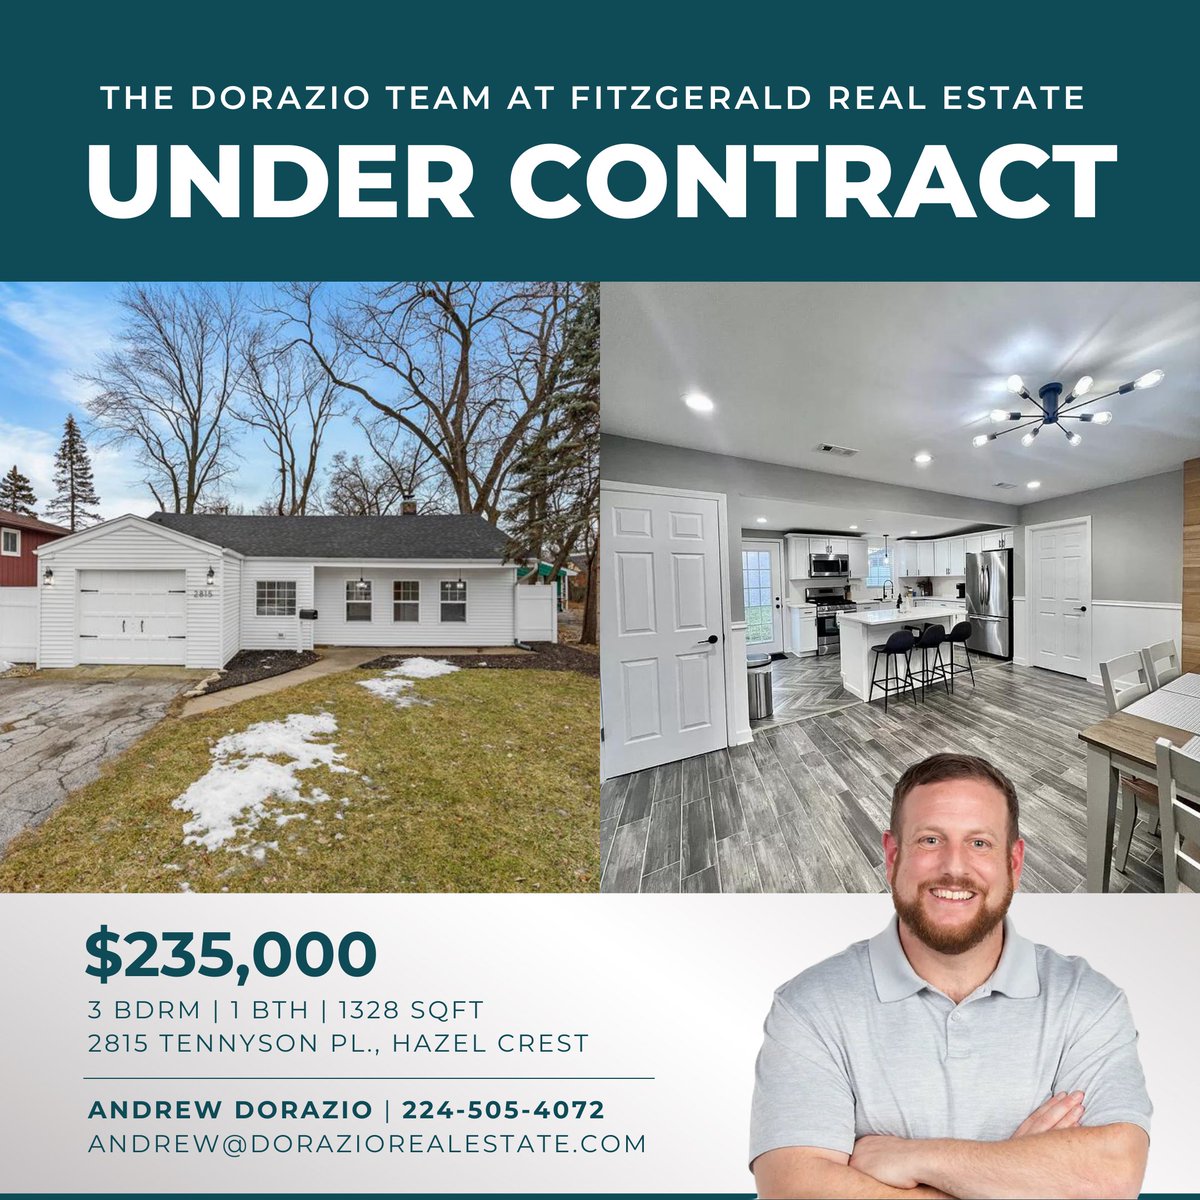 Happy to help our repeat client get under contract on this beautiful, recently renovated 3BD home in Hazel Crest! 🏡

#doraziorealestate #dorazioteam #fitzgeraldrealestate #undercontract #hazelcrest #chicagorealestate #salepending